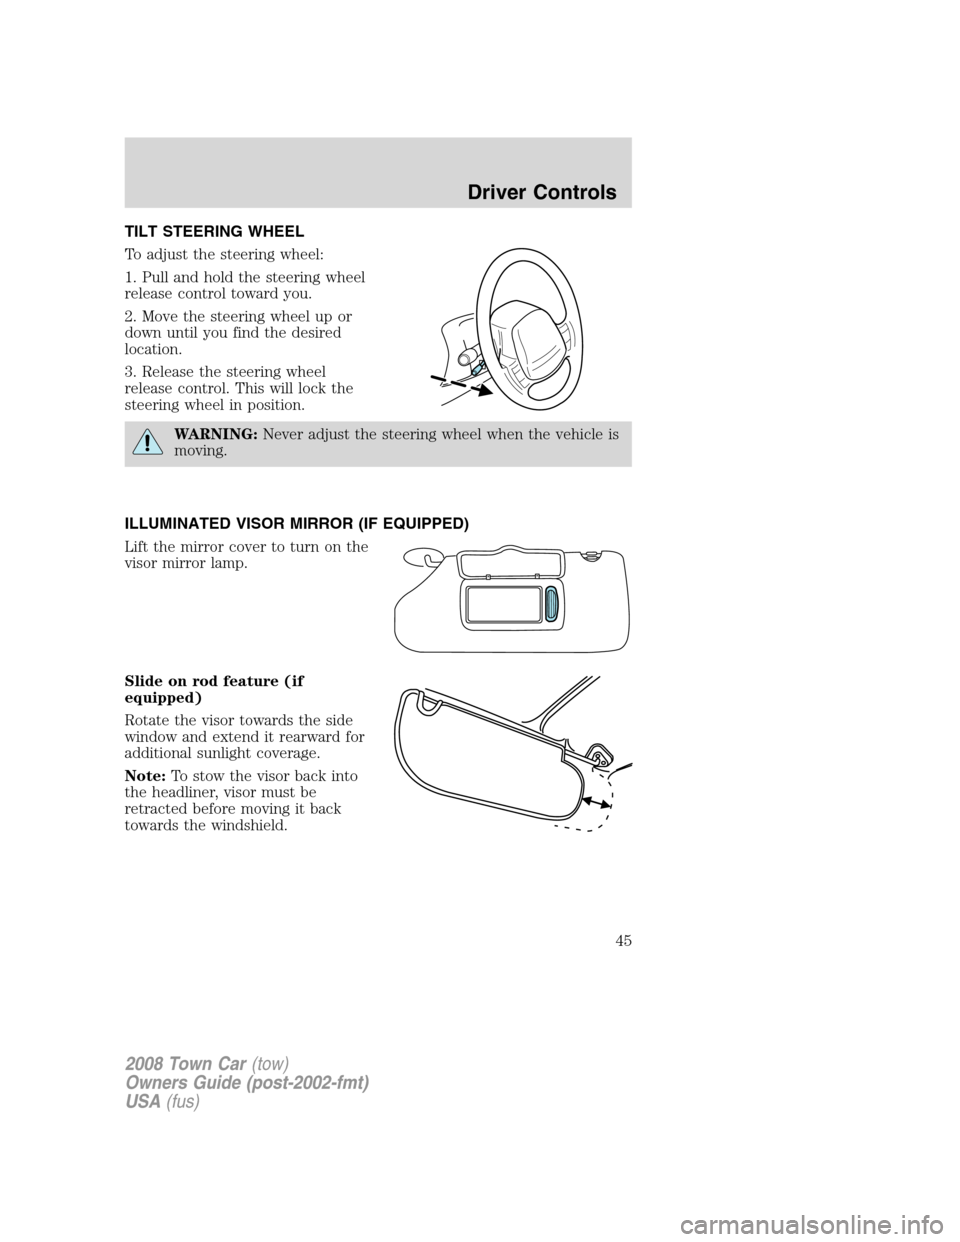 LINCOLN TOWN CAR 2008  Owners Manual TILT STEERING WHEEL
To adjust the steering wheel:
1. Pull and hold the steering wheel
release control toward you.
2. Move the steering wheel up or
down until you find the desired
location.
3. Release 